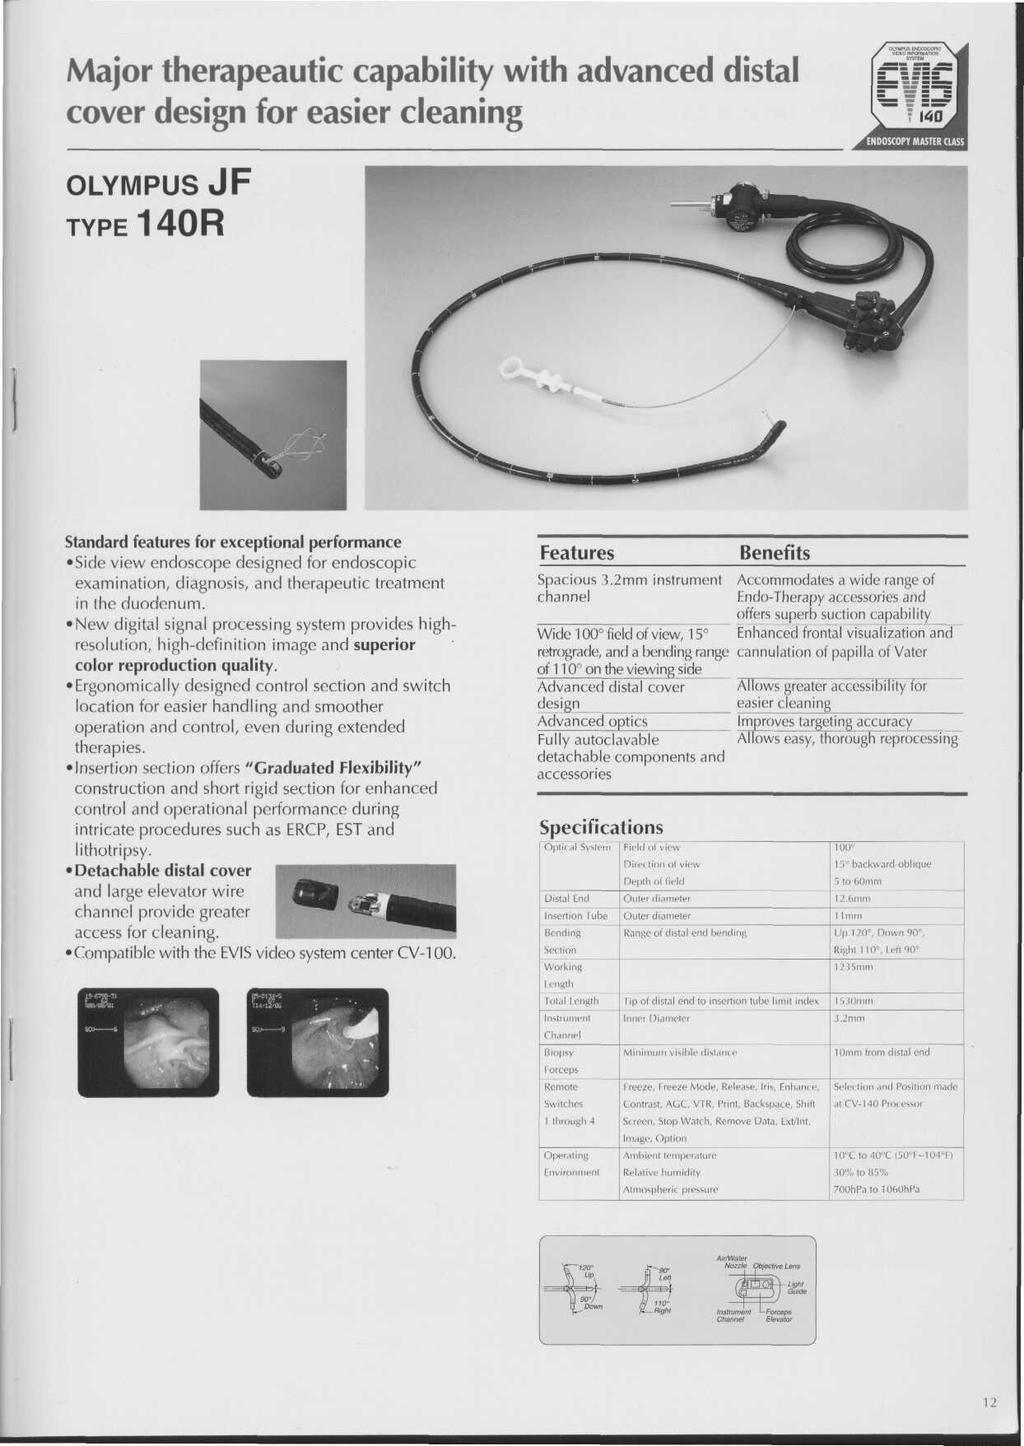 Major therapeautic capability with advanced distal cover design for easier cleaning OLYMPUS JF TYPE140R Standard features for exceptional performance Side view endoscope designed for endoscopic